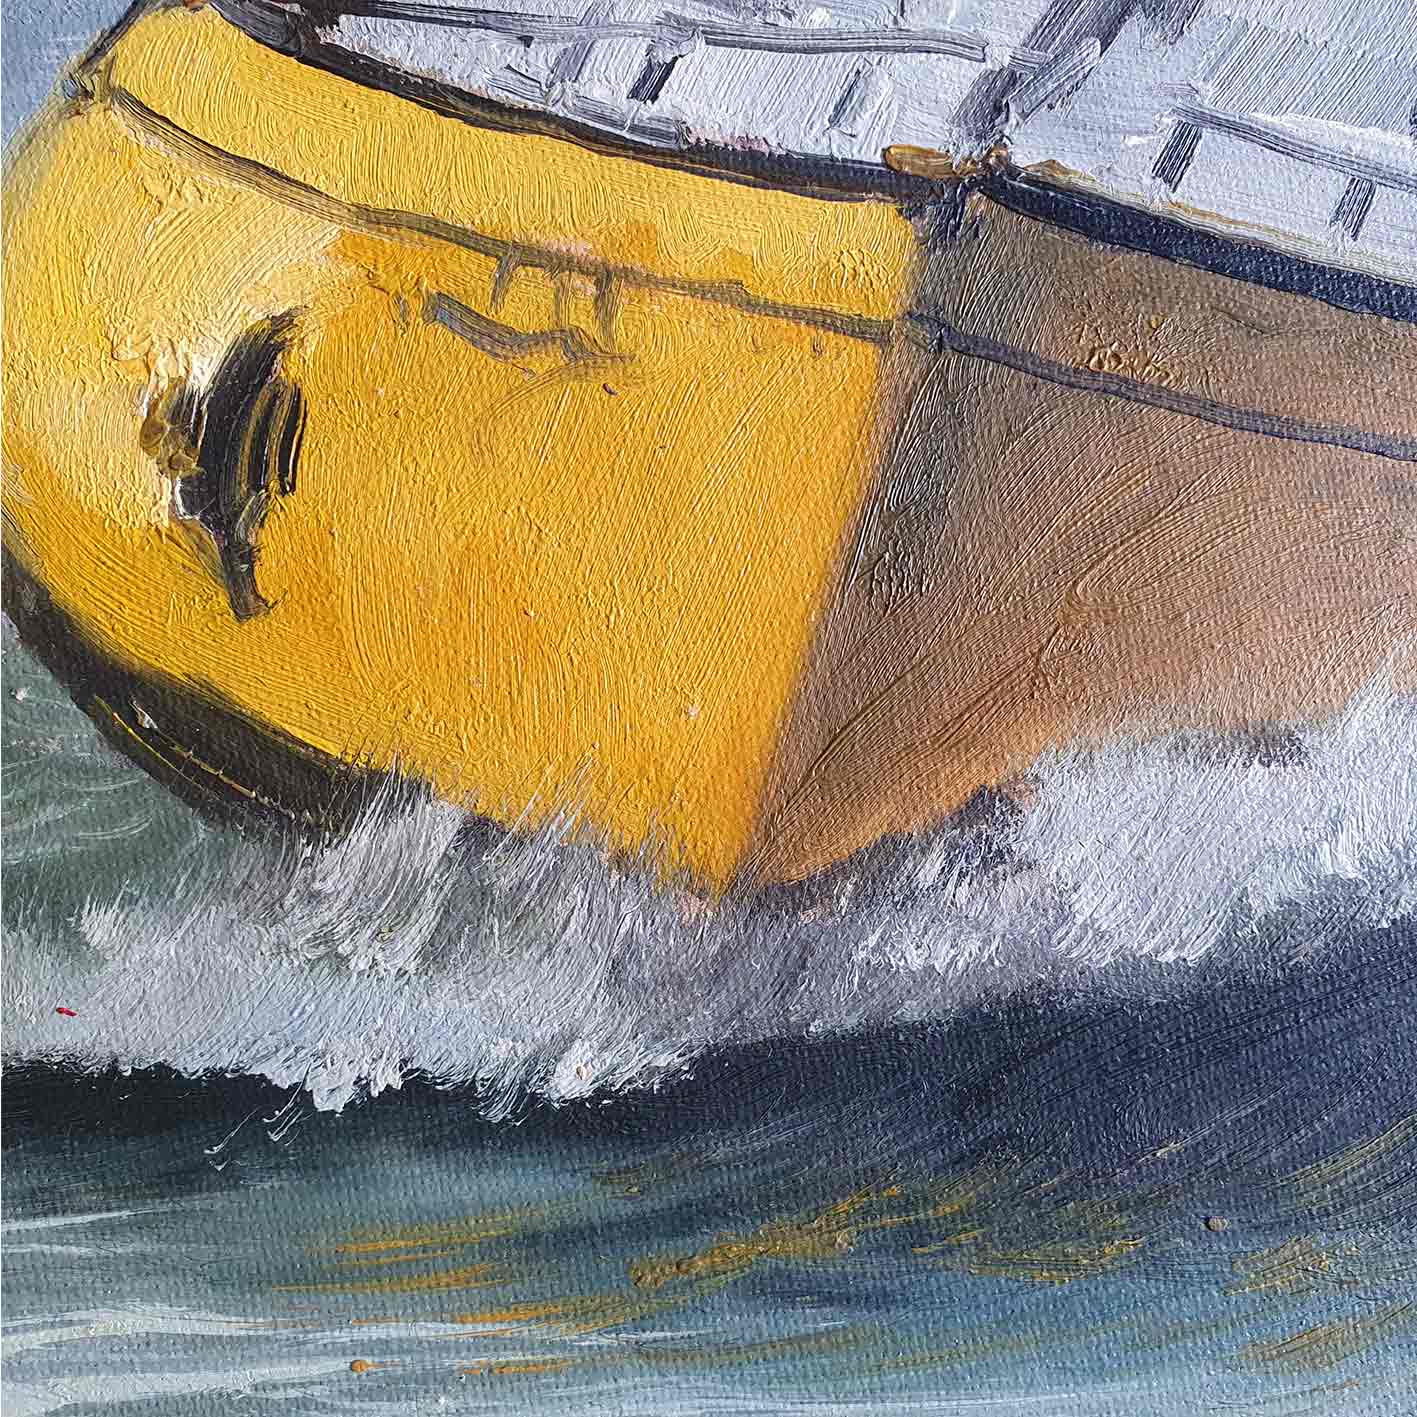 Painting I Have a Yellow Boat